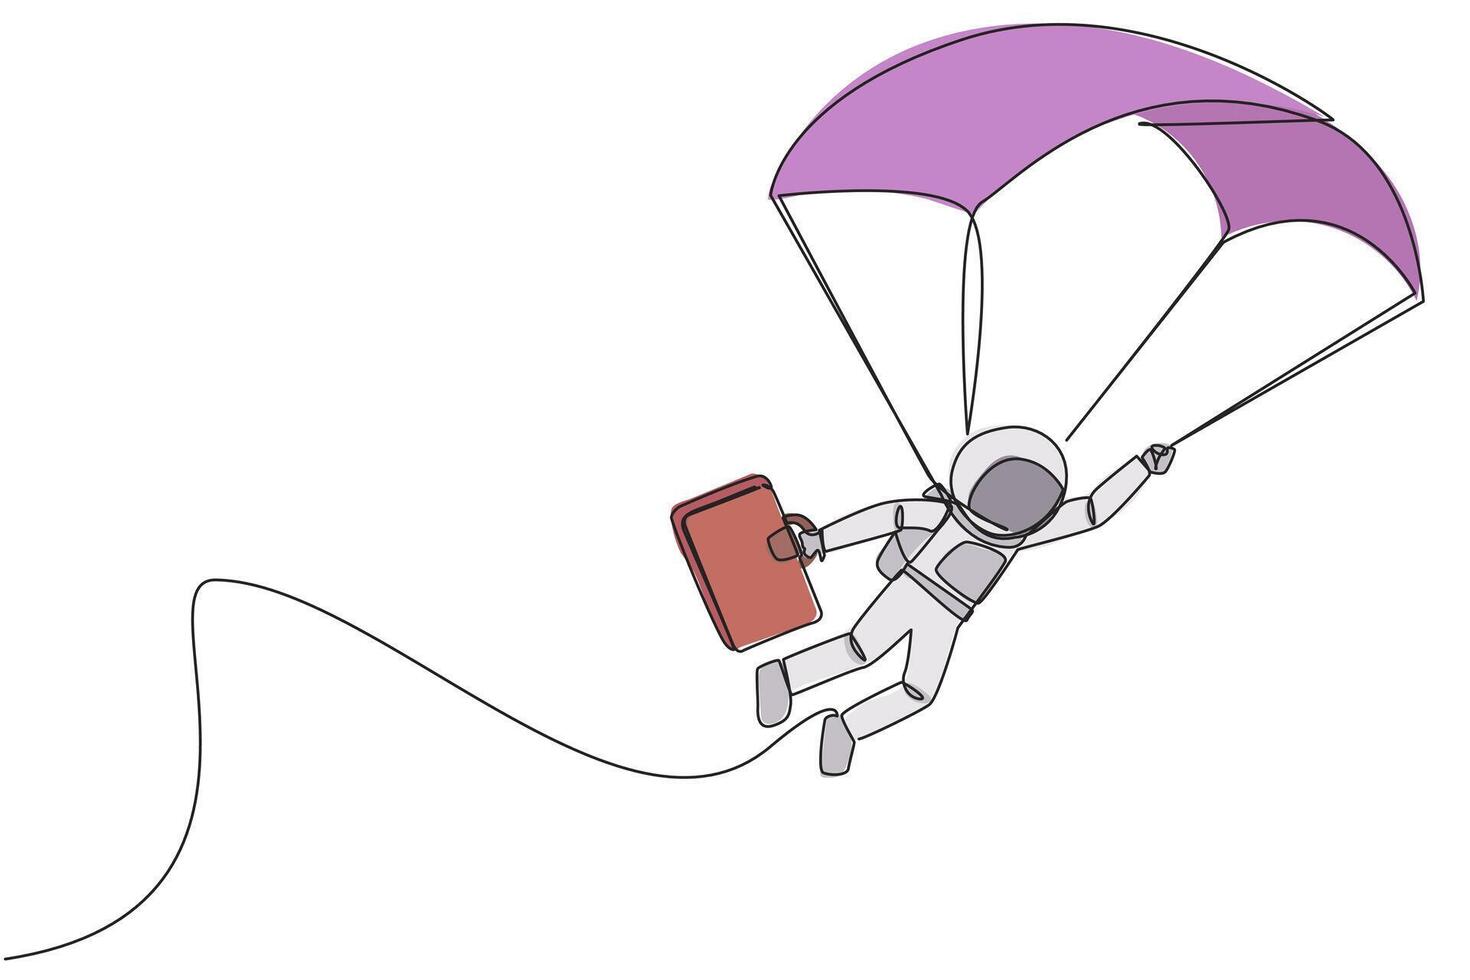 Continuous one line drawing young energetic astronaut flying with parachute holding briefcase. Tidy up parachute and then join the expedition team on earth. Single line draw design vector illustration